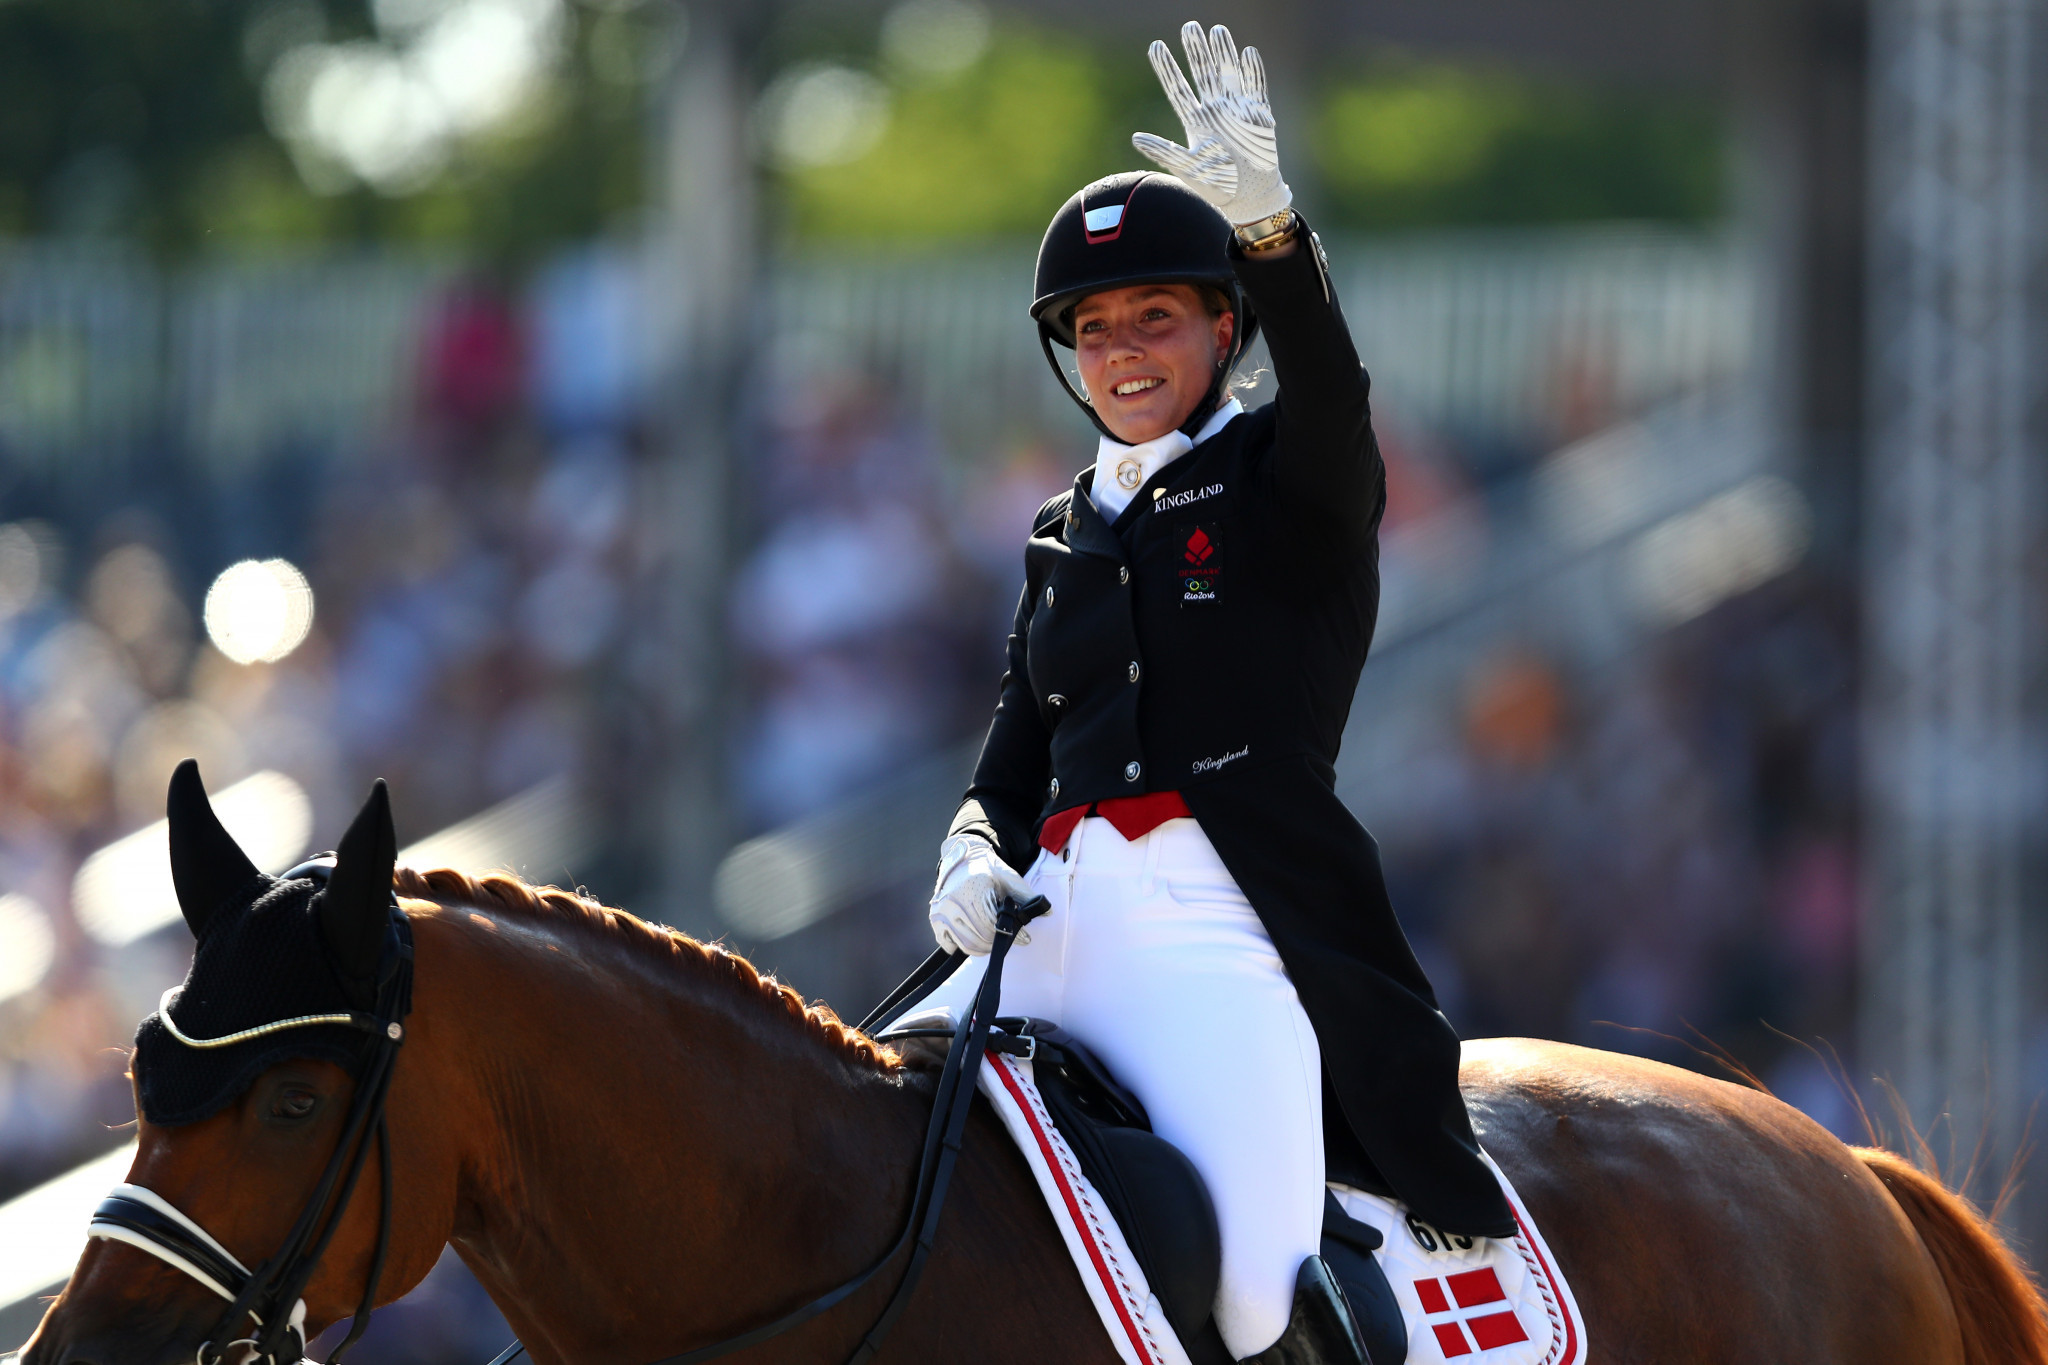 Cathrine Dufour of Denmark recorded a personal best to take victory at the FEI Dressage World Cup in Gothenburg ©Getty Images